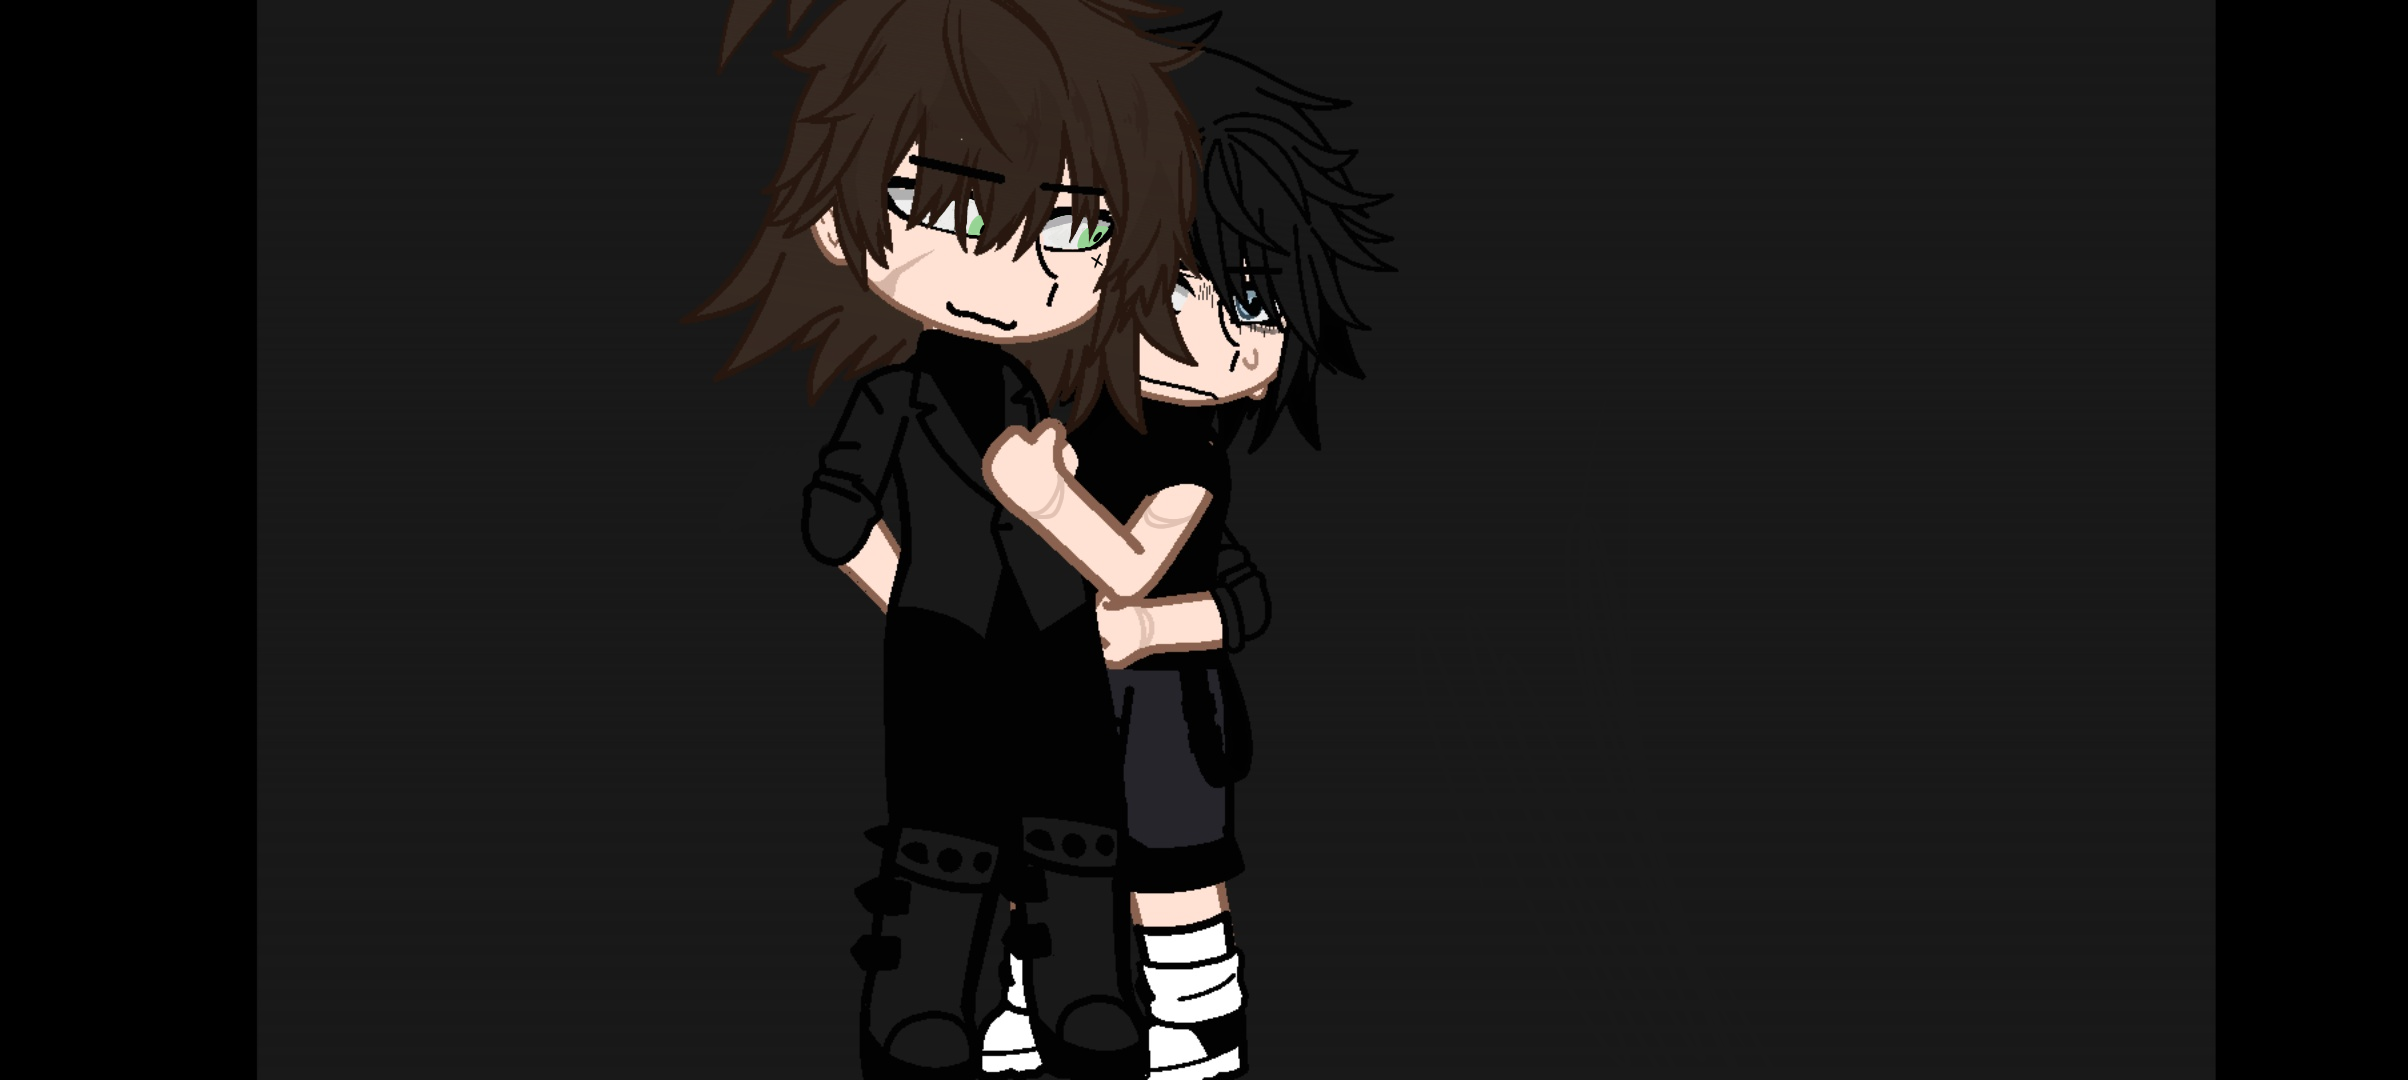 This mod Is AMAZING! btw i made this Two characters ( Hope i write It right ) and if you want you can take an ISPIRATION from them BUT NOT COPY! And if you do i wanted credits anyways tell me if you like them byee